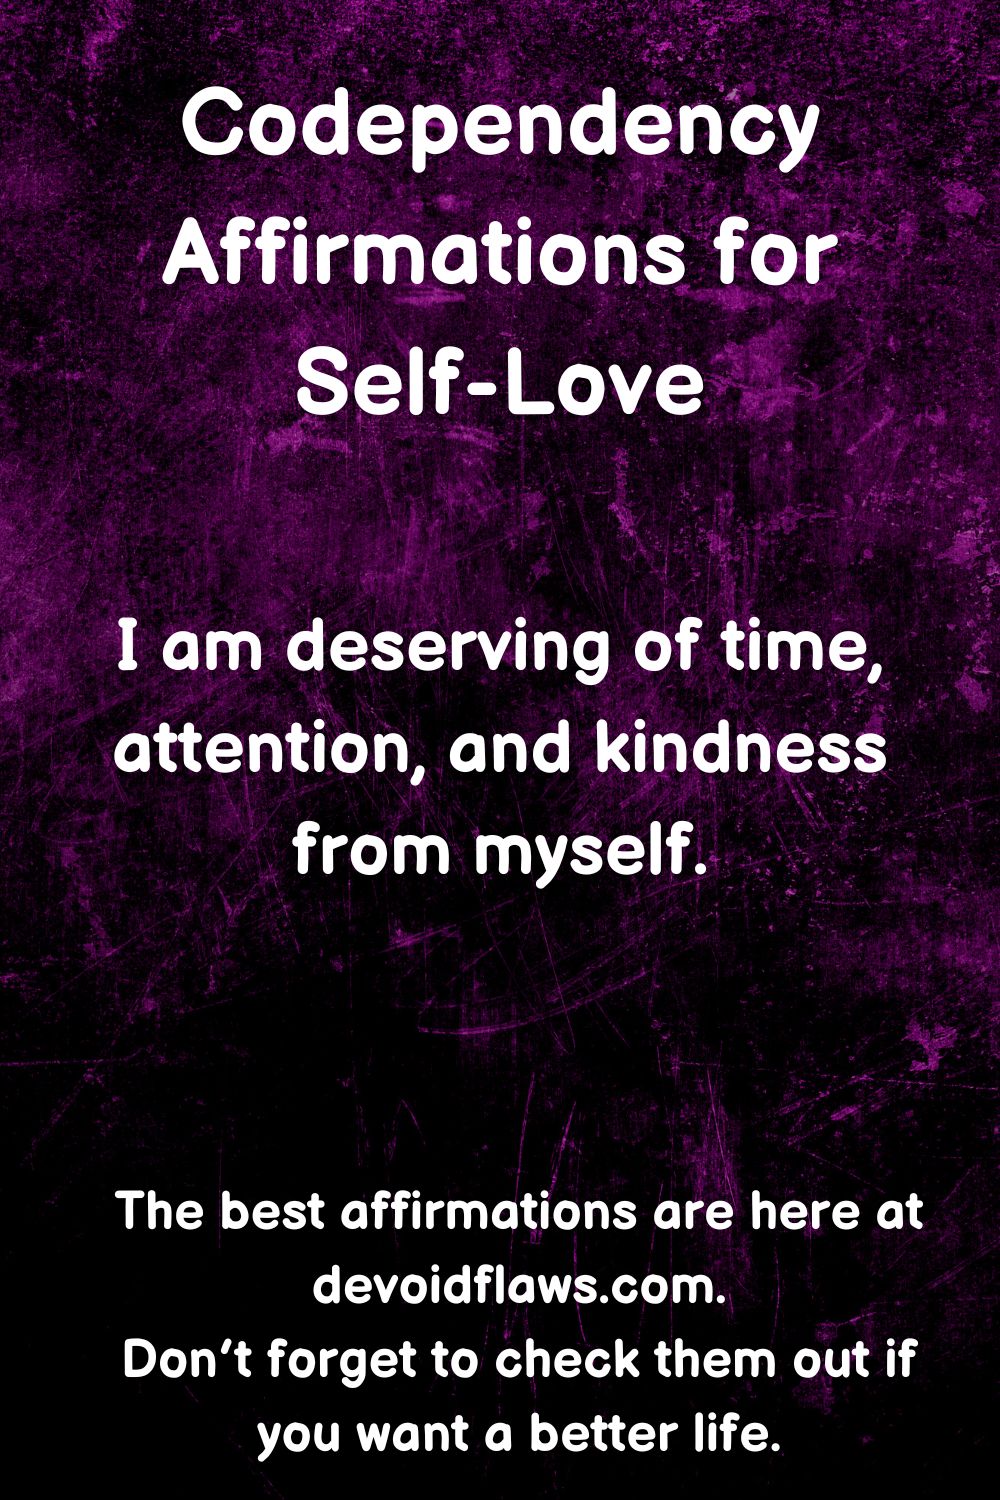 codependency affirmations for self love